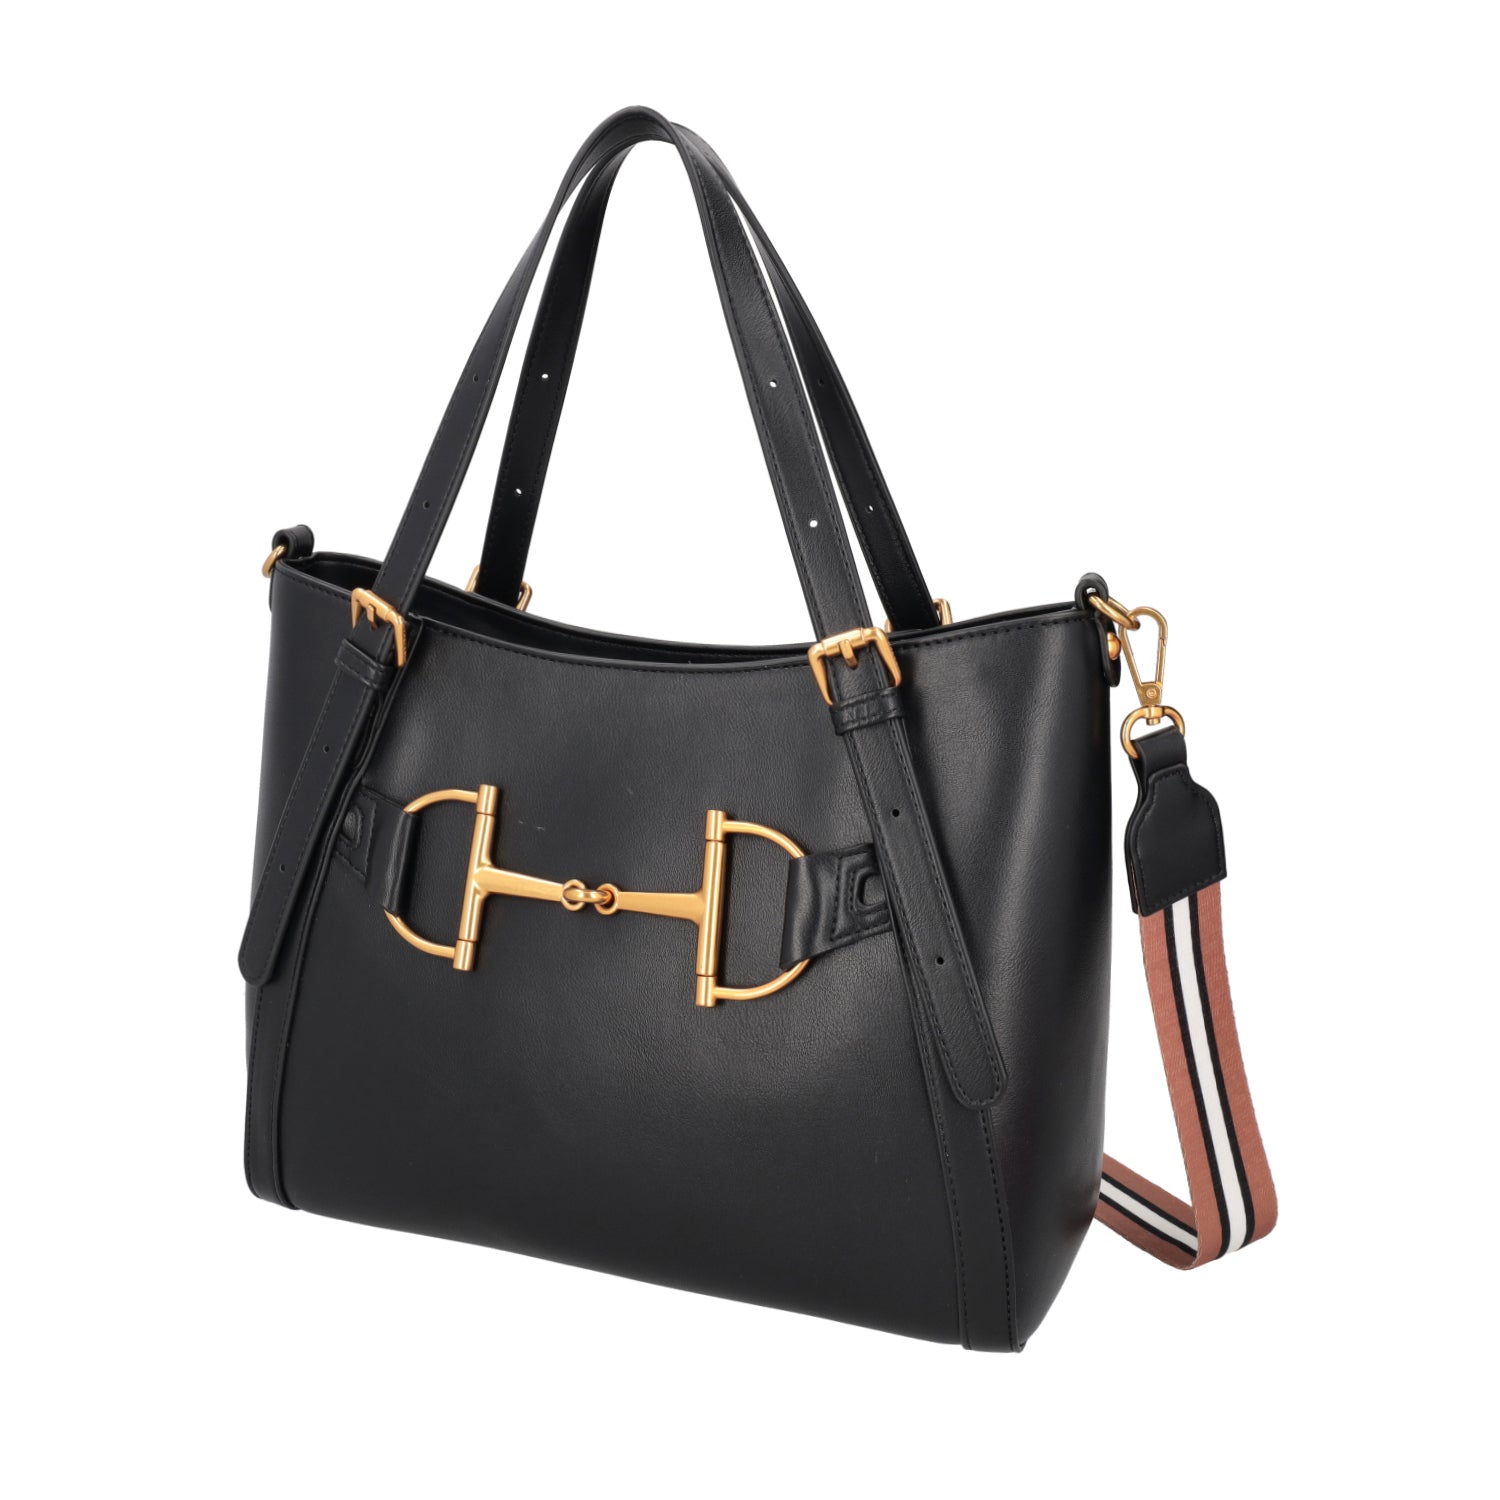 BLACK TULIPANO SHOPPING BAG WITH SHOULDER STRAP